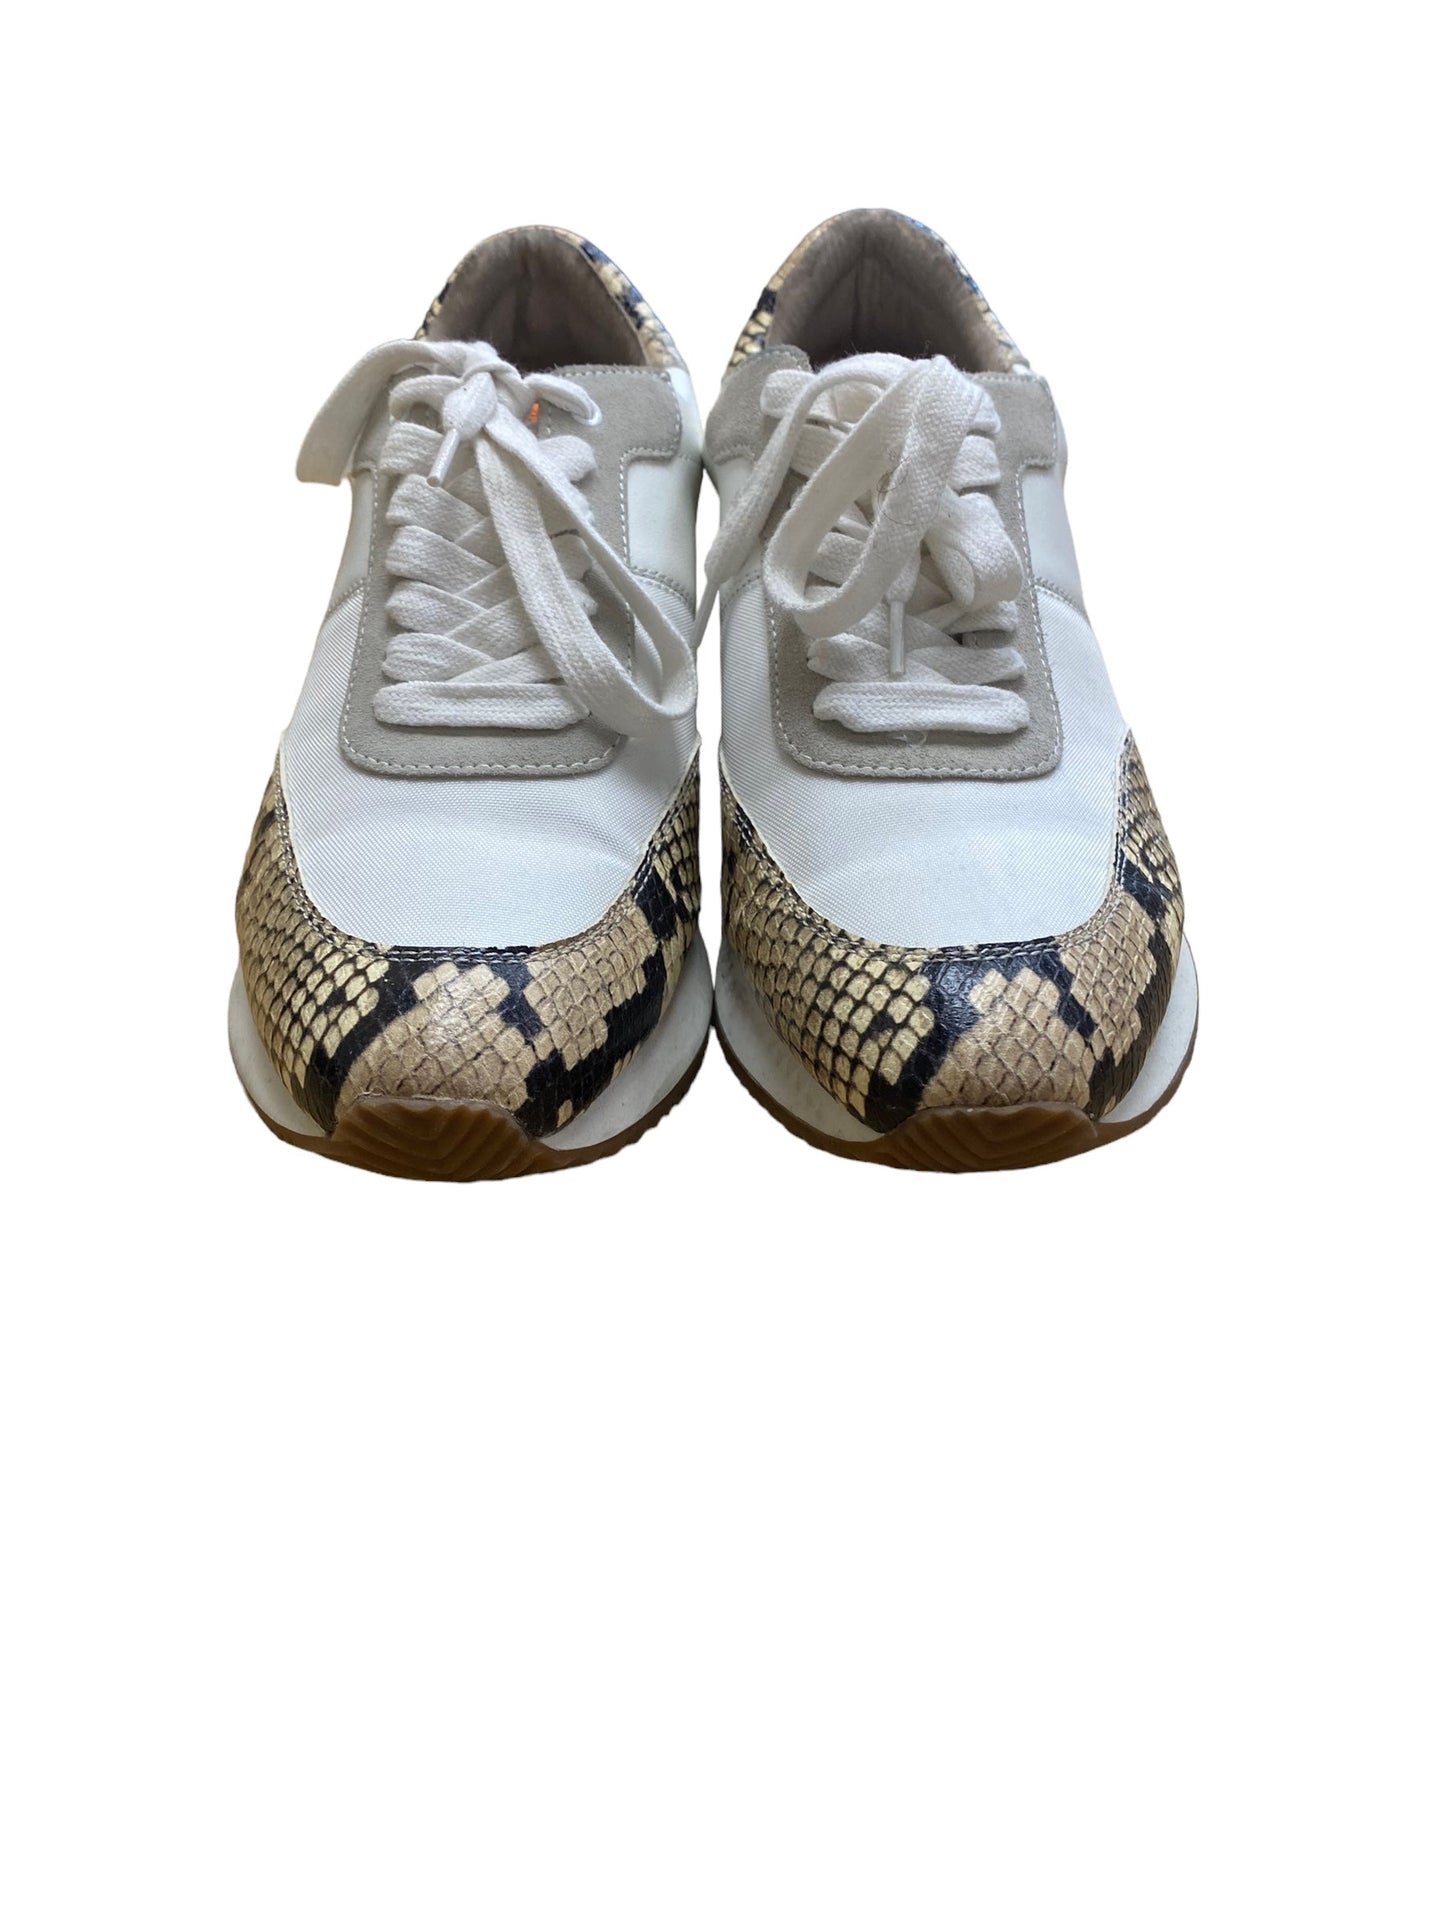 Shoes Sneakers By Banana Republic  Size: 9